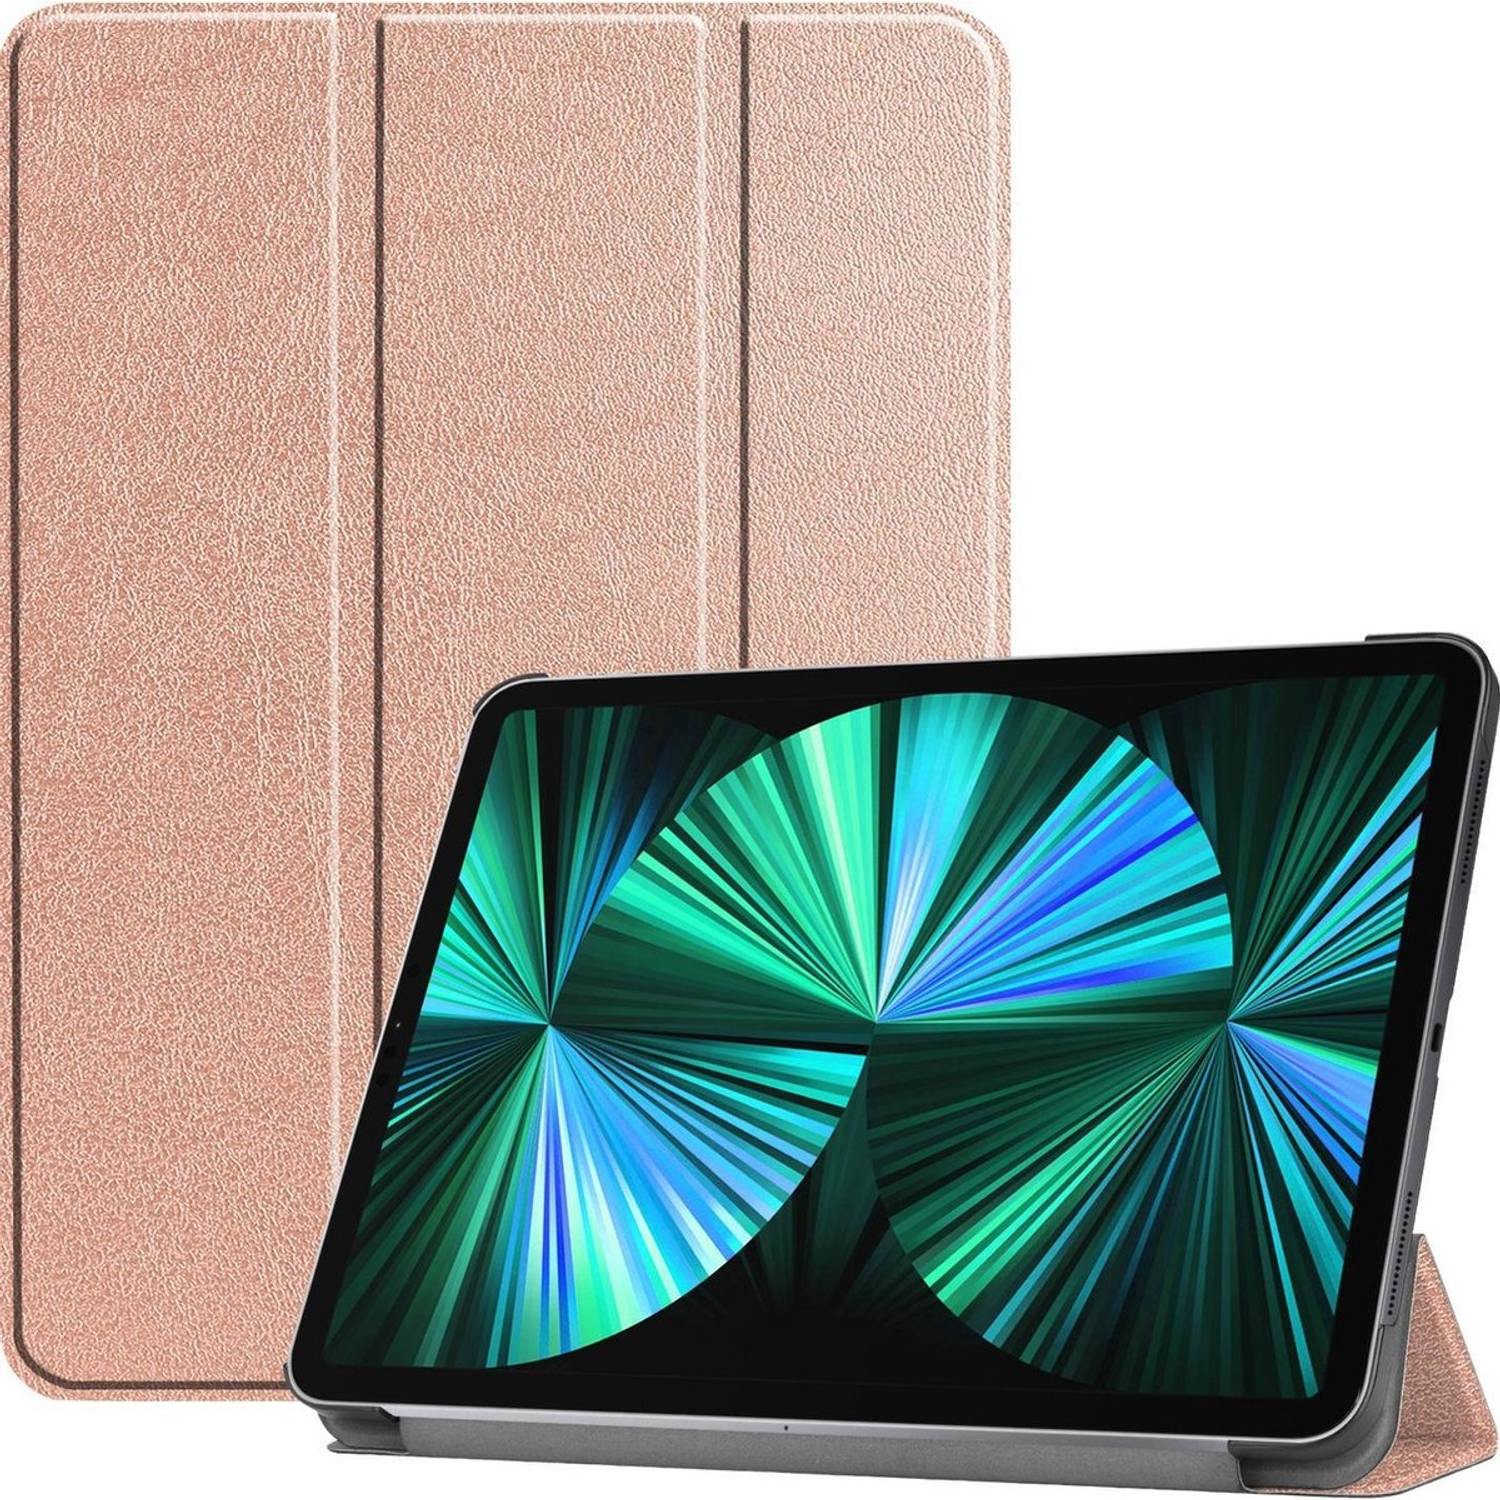 Basey iPad Pro 2021 12,9 inch Hoes Case Hoesje rose Goud Hardcover Book Case Cover